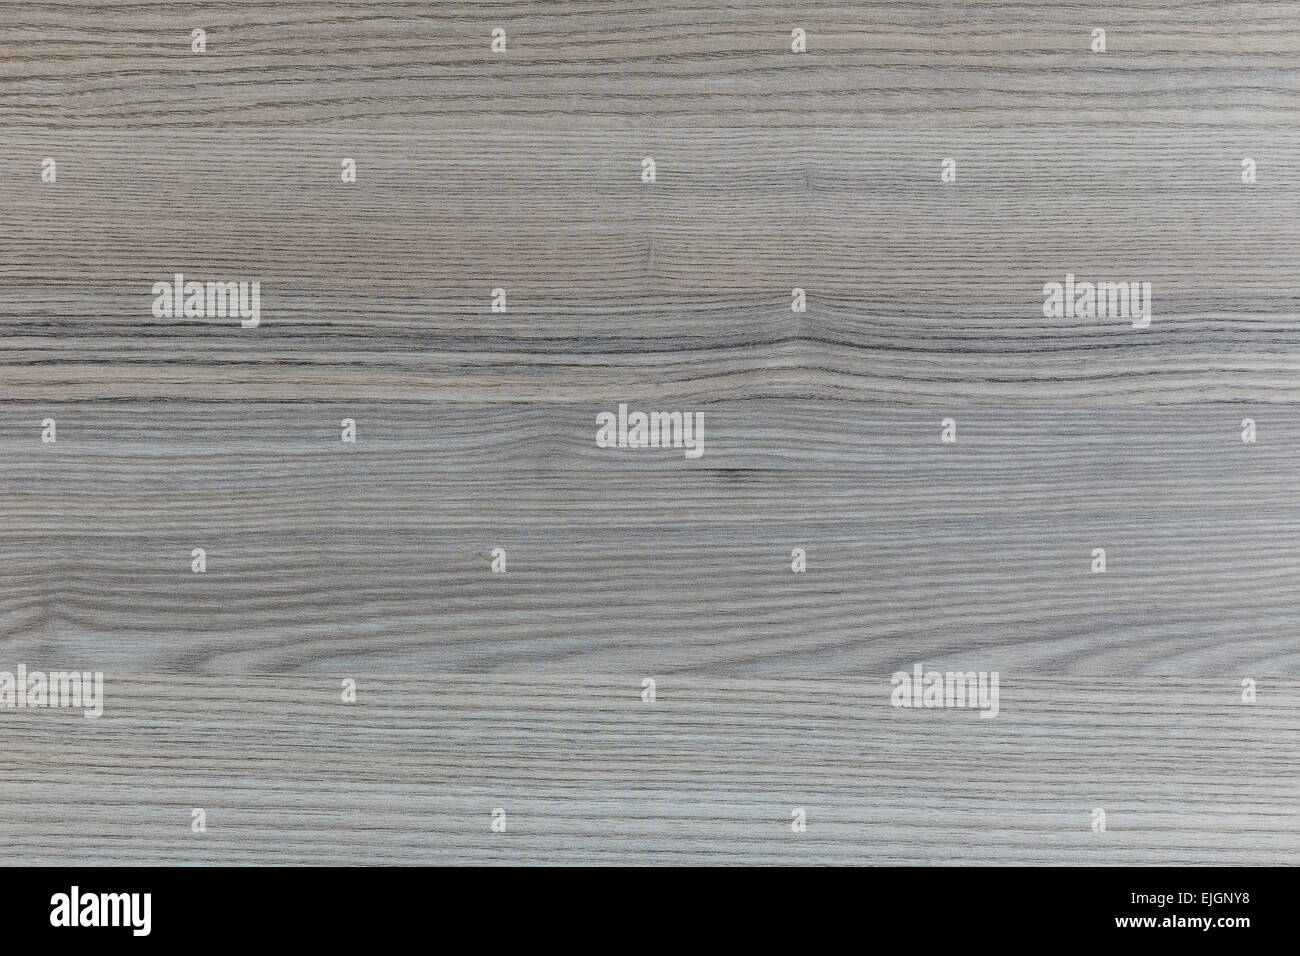 Texture of wooden furniture Stock Photo